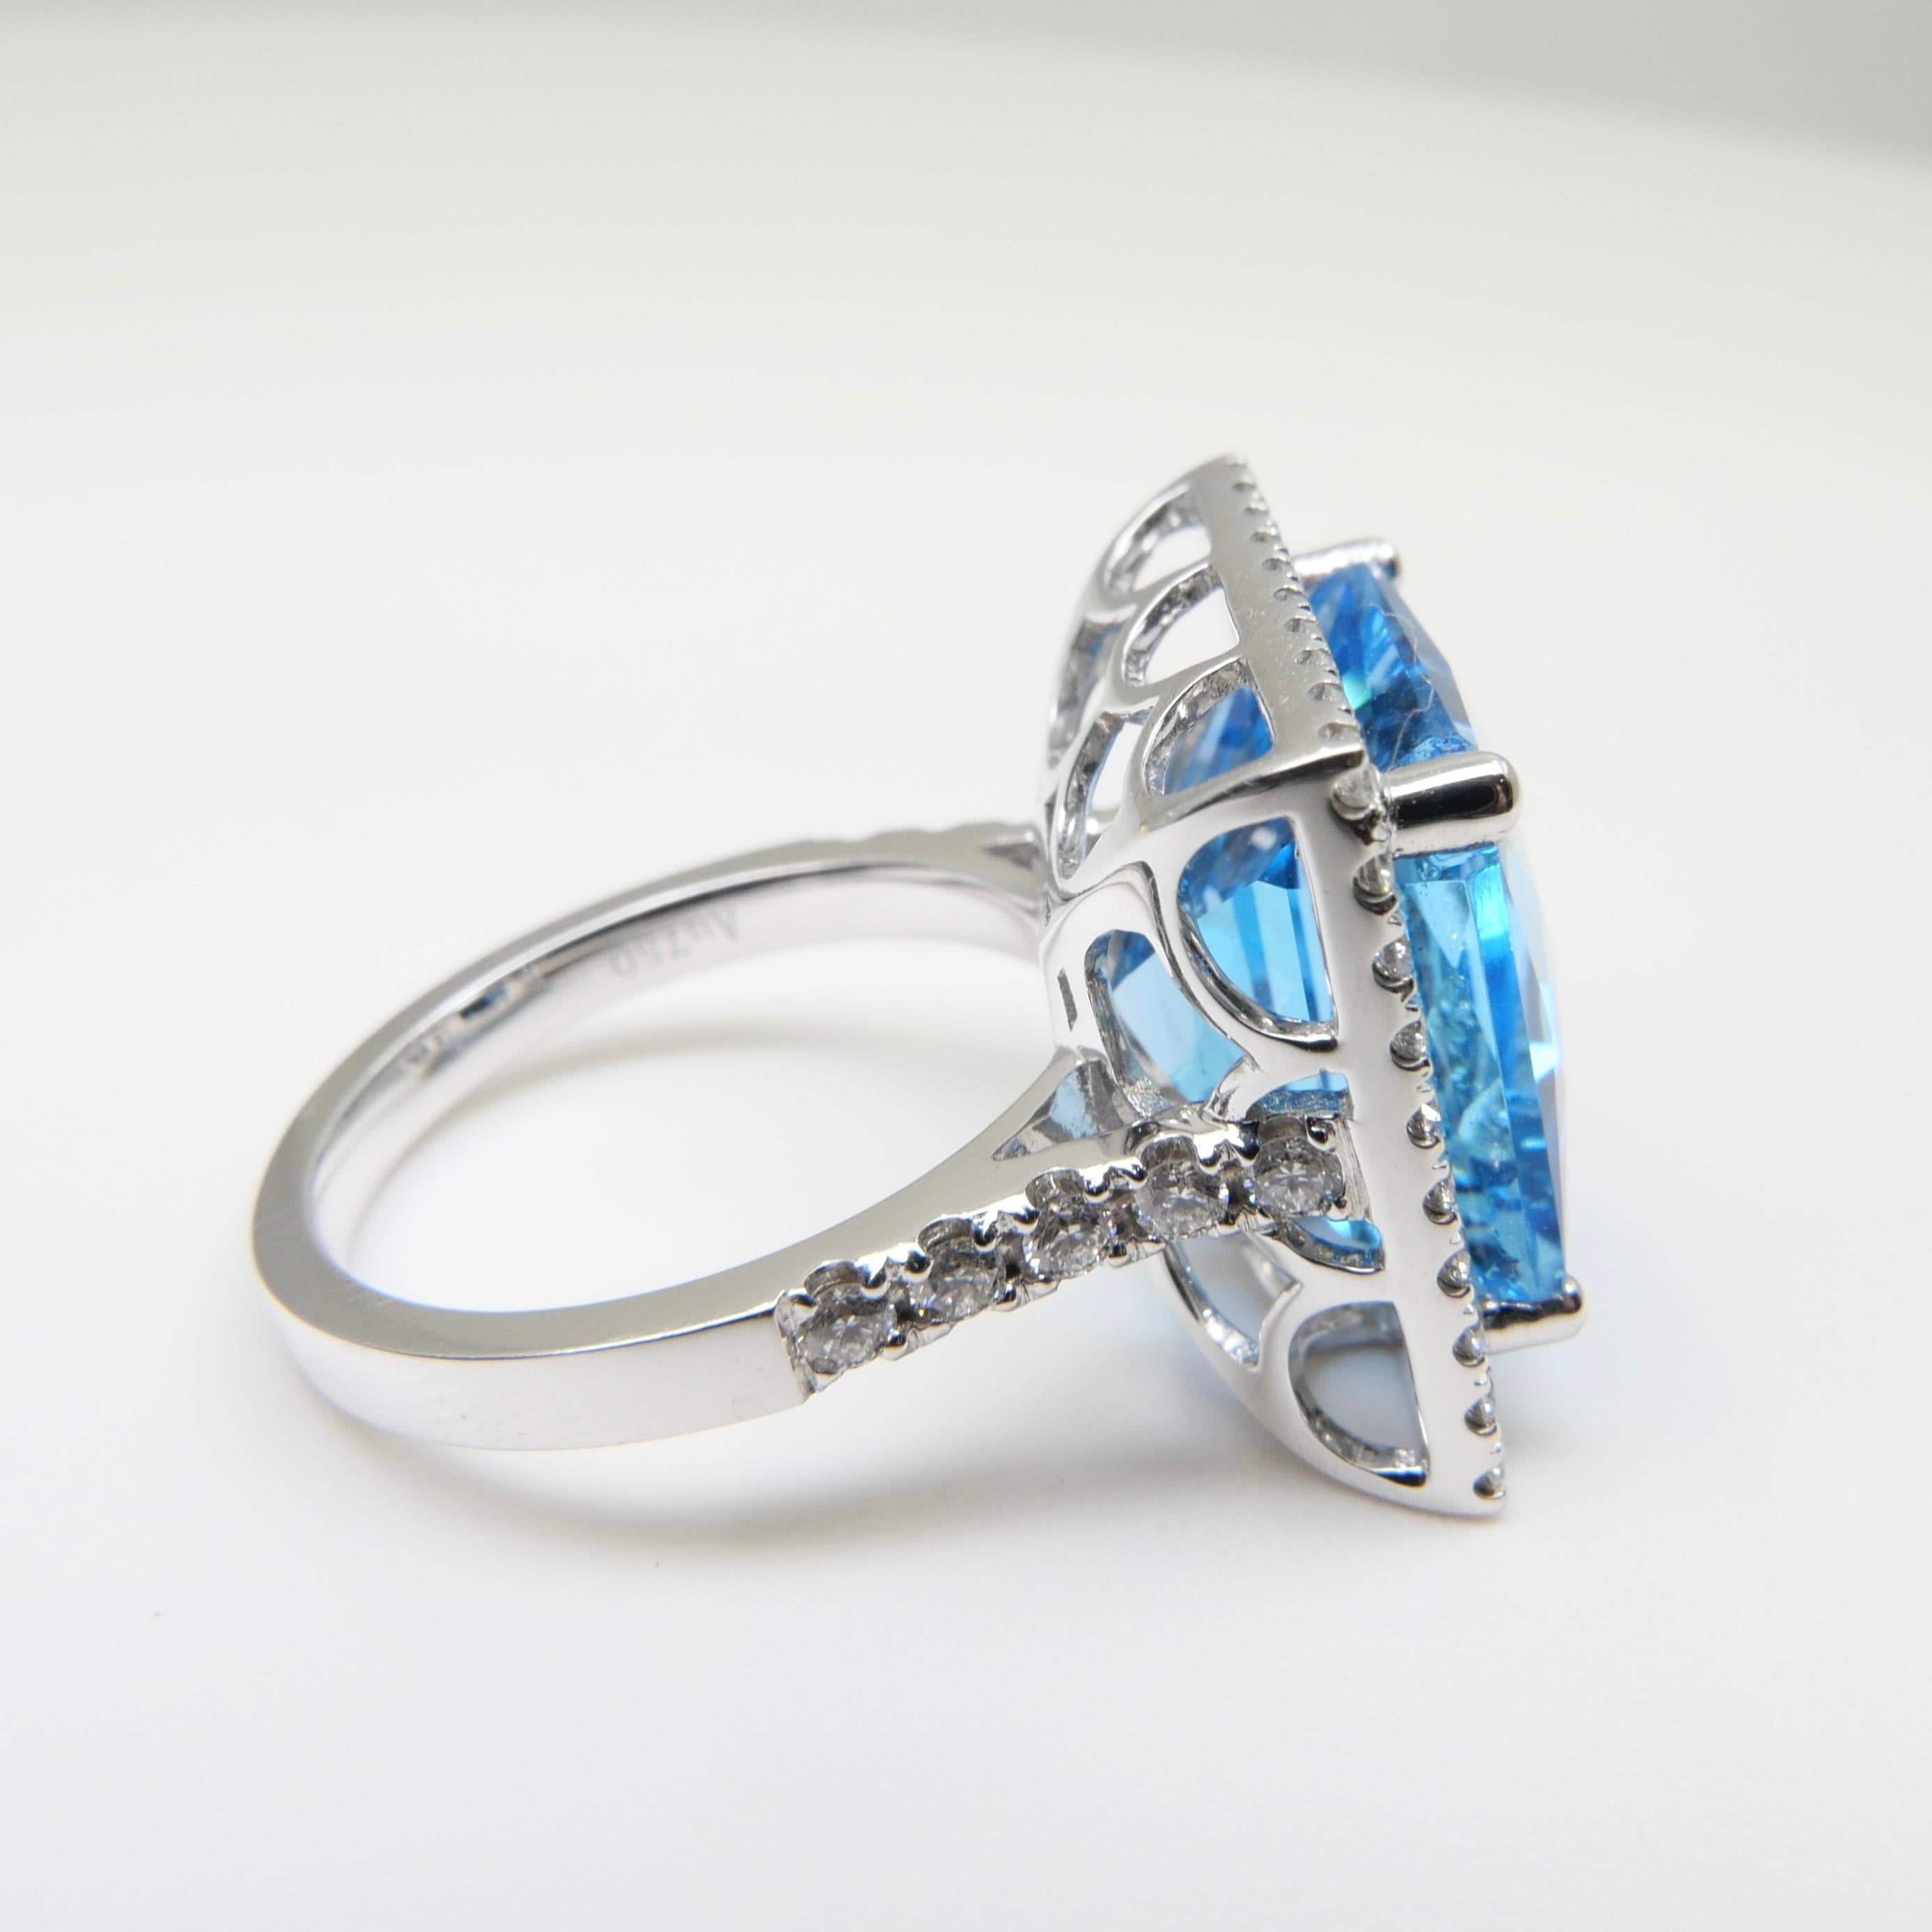  13 Cts checker Square Cut Blue Topaz & Diamond Cocktail Ring. Big Statement. For Sale 11